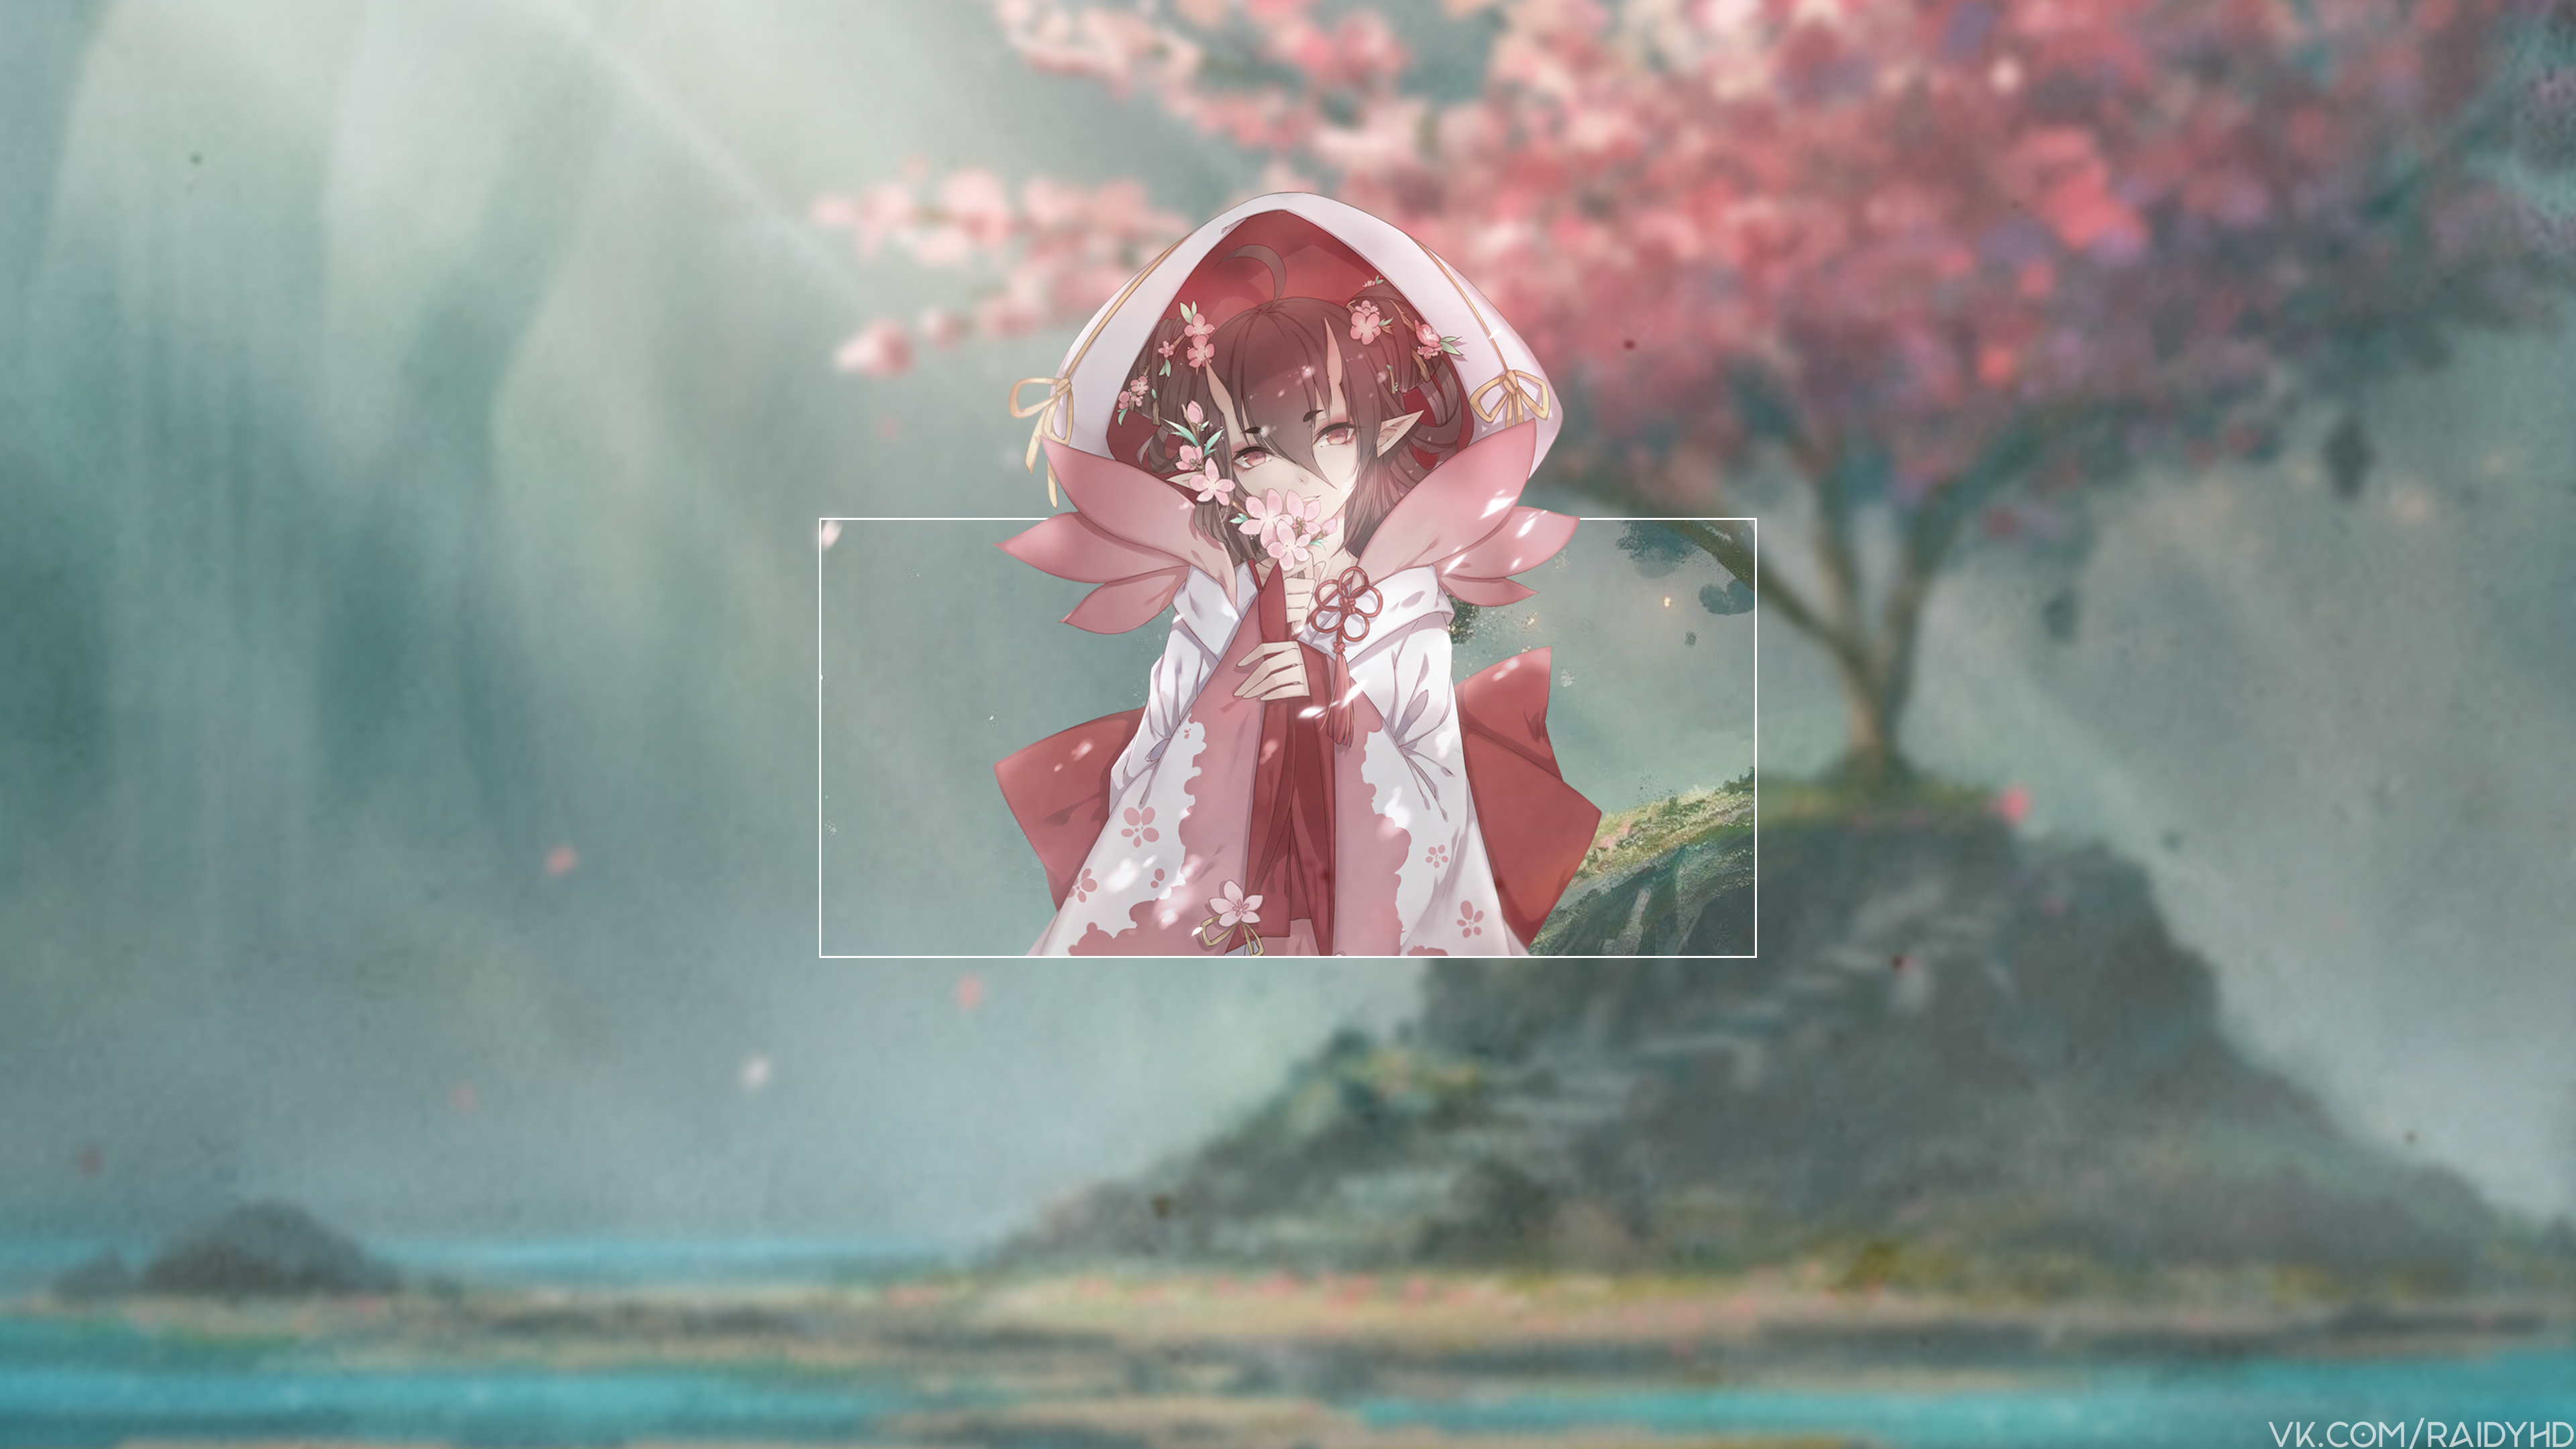 Anime 3840x2160 anime anime girls picture-in-picture cherry blossom cherry trees